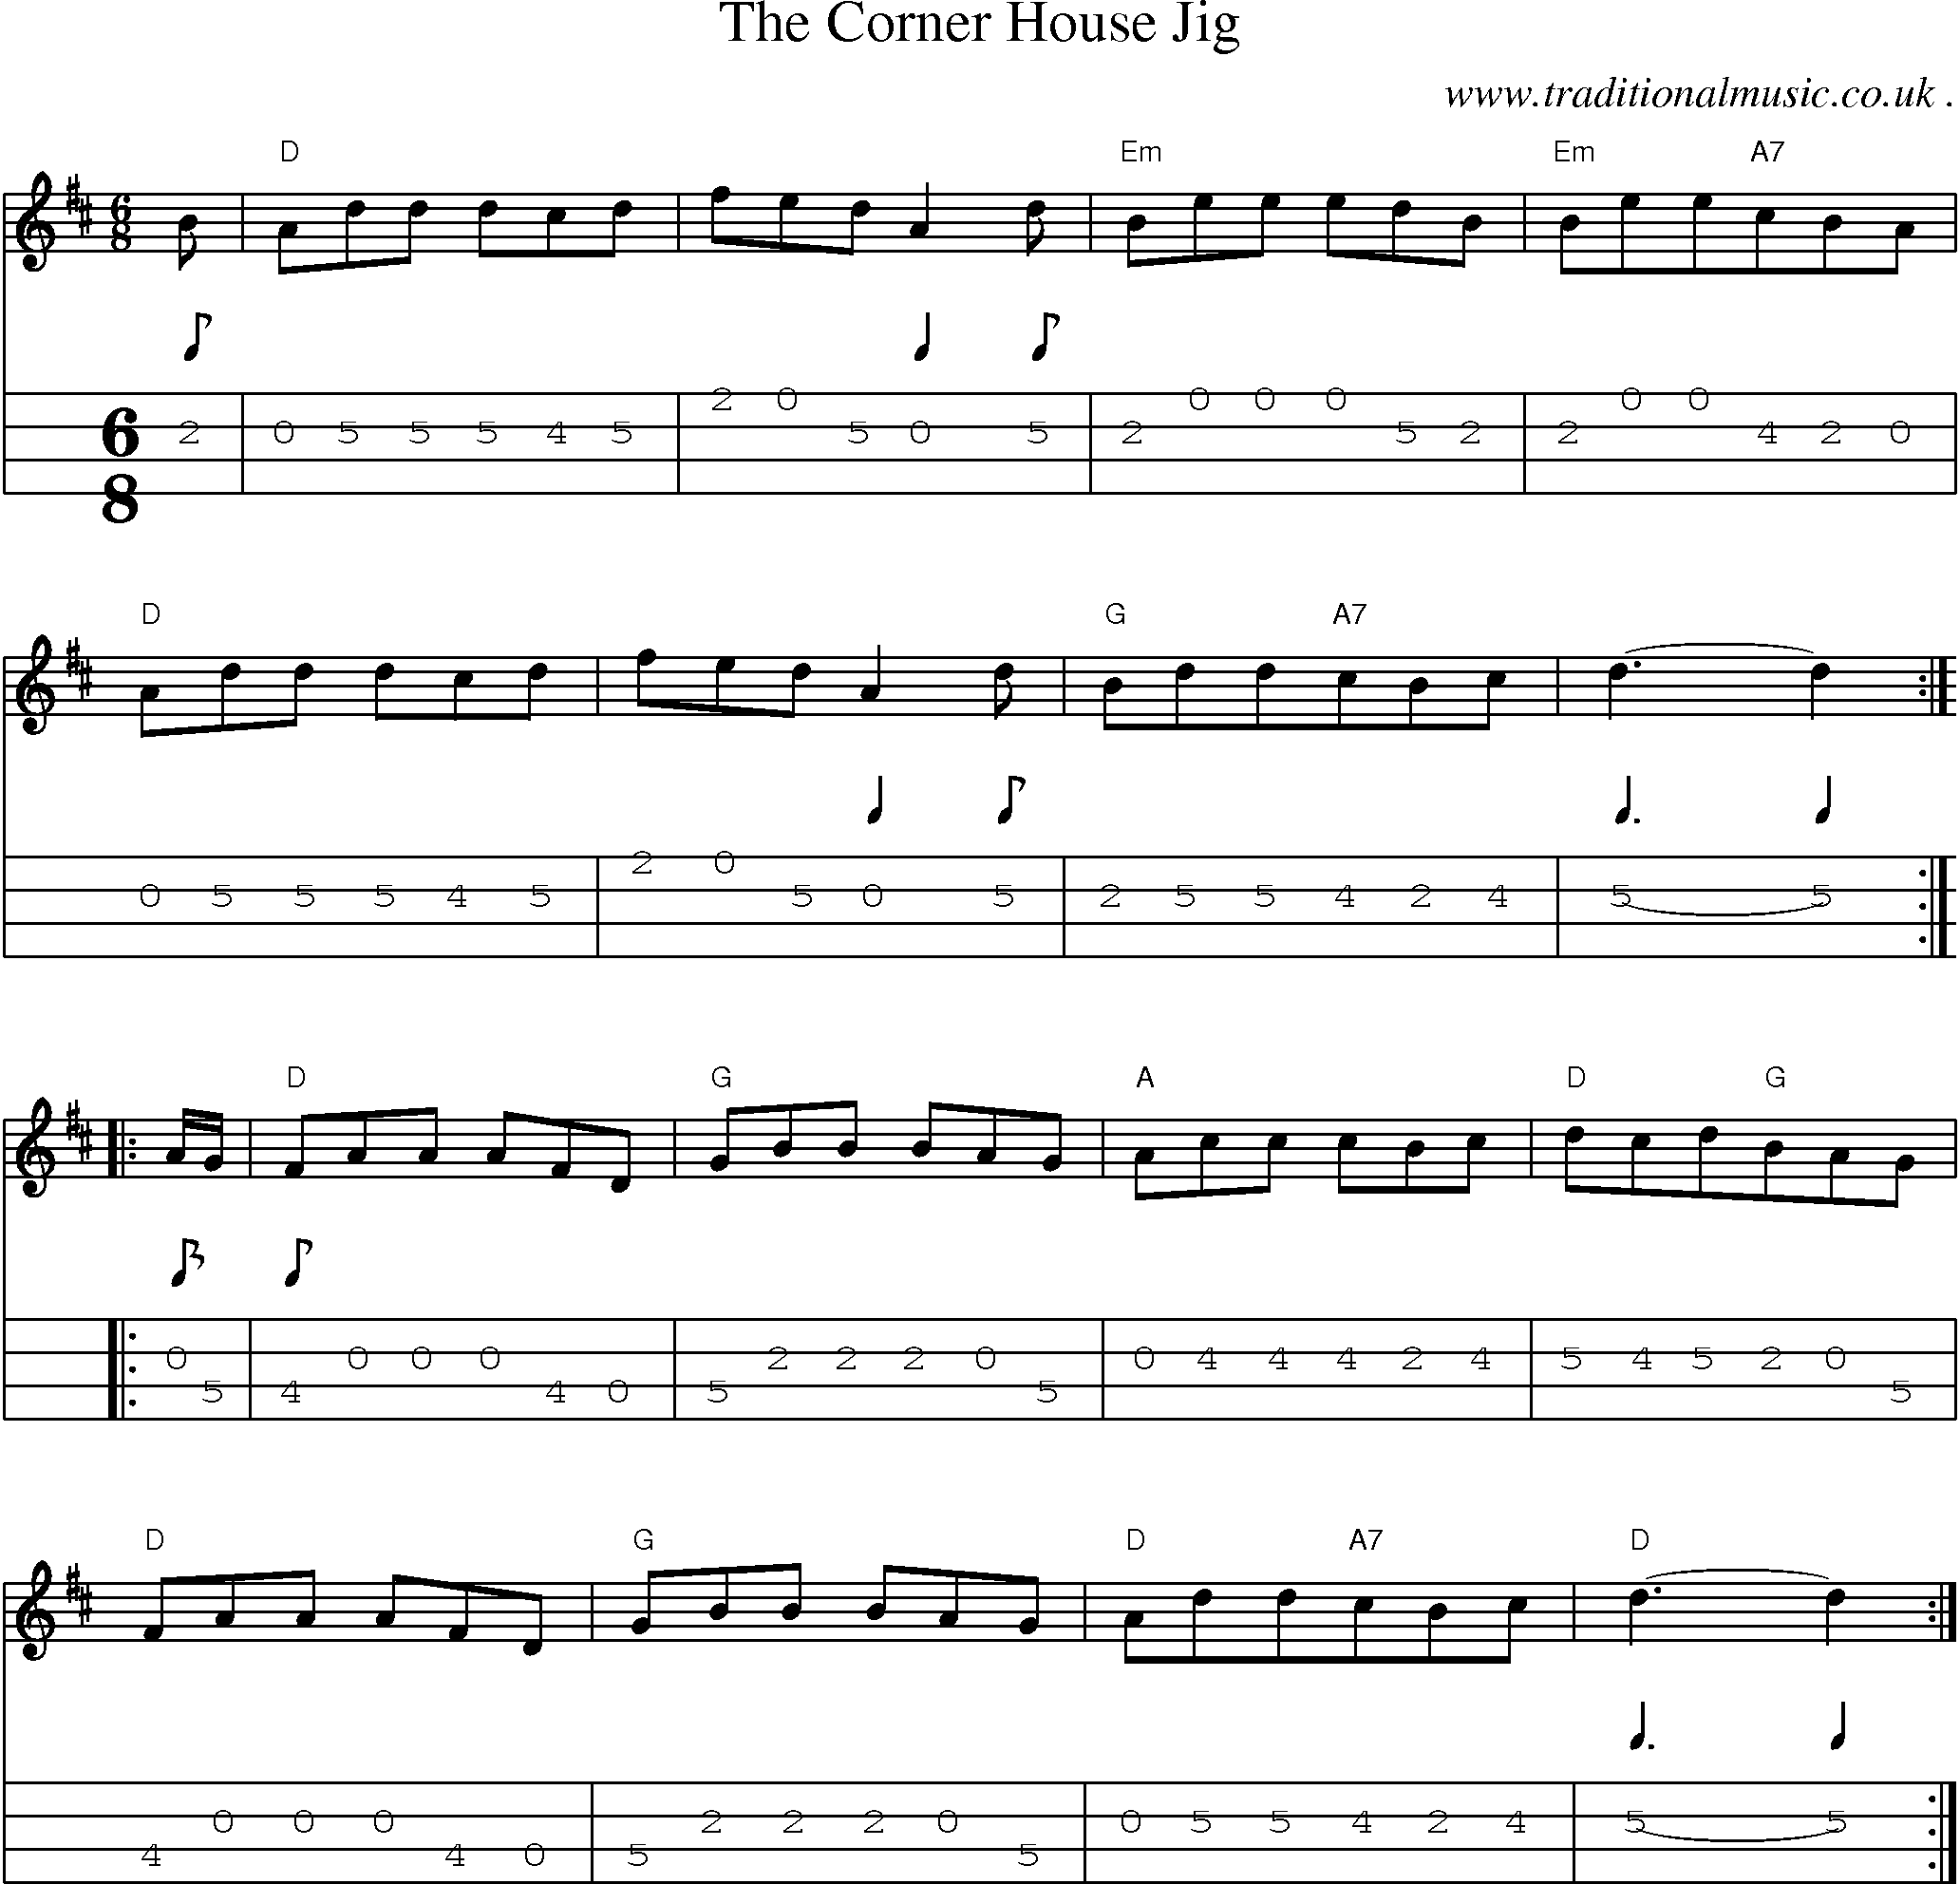 Sheet-Music and Mandolin Tabs for The Corner House Jig